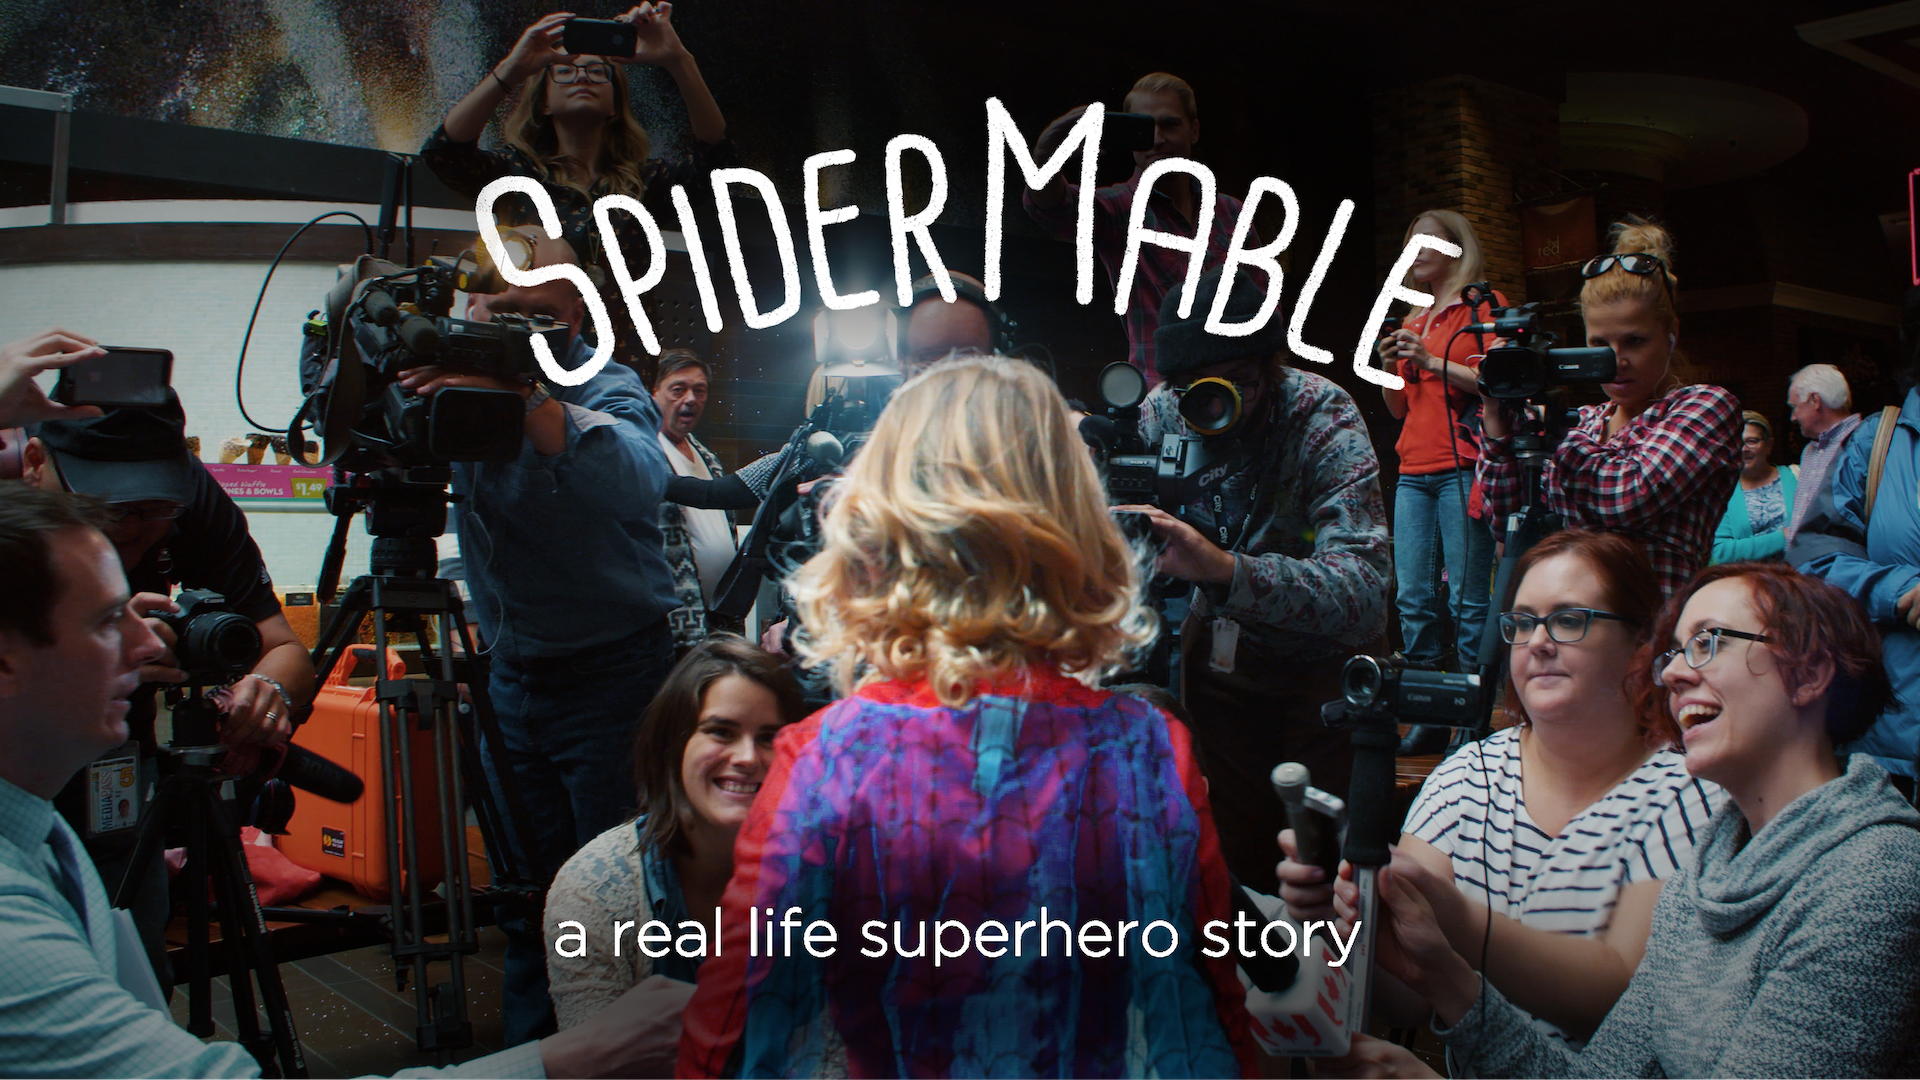 SpiderMable -  a real life superhero story